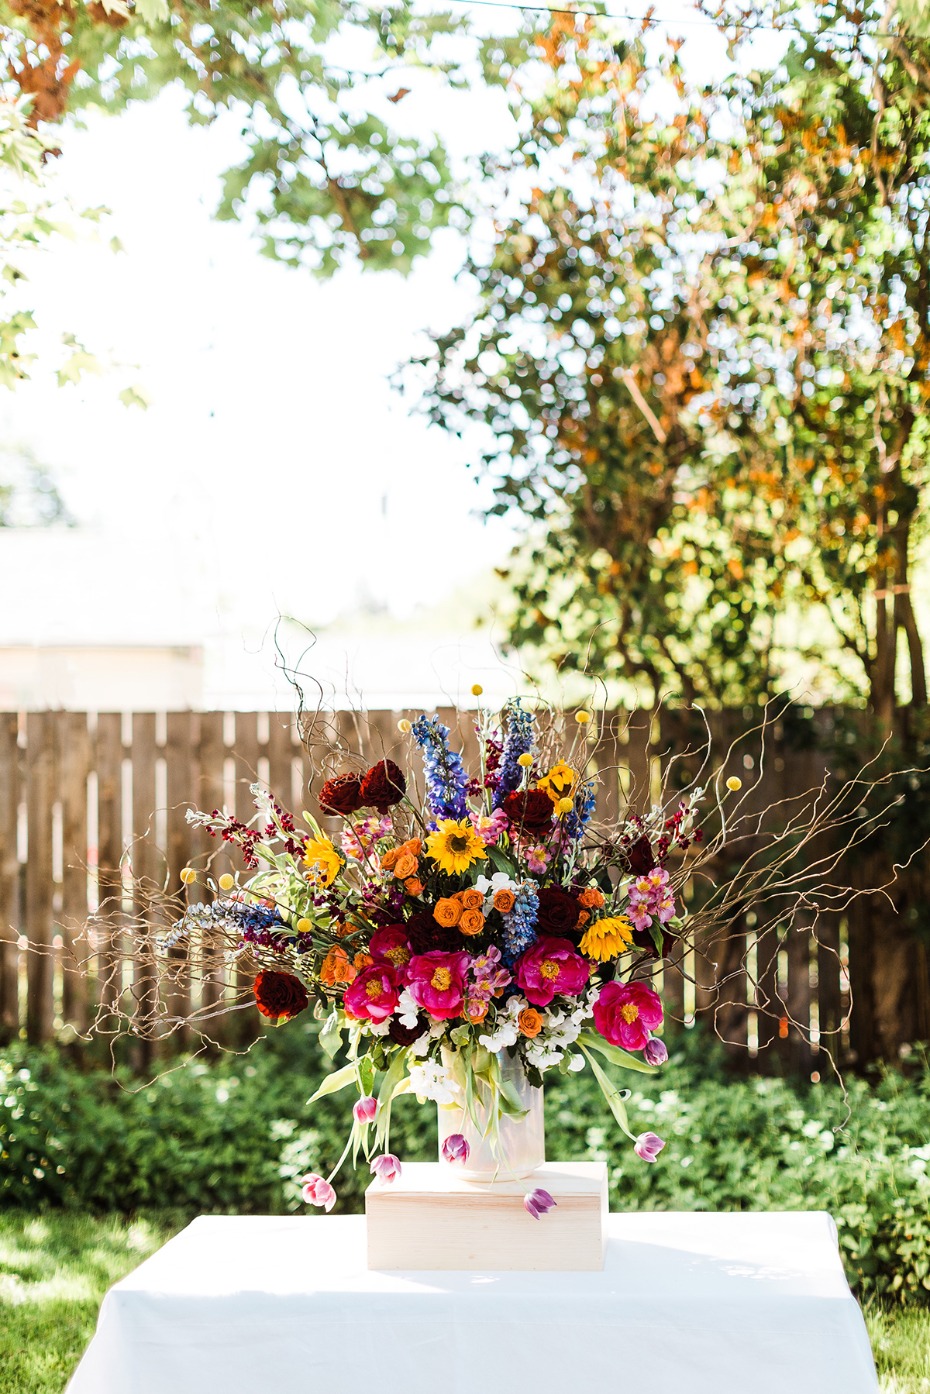 boho chic floral arrangement from Wholesale Flowers by FiftyFlowers.com